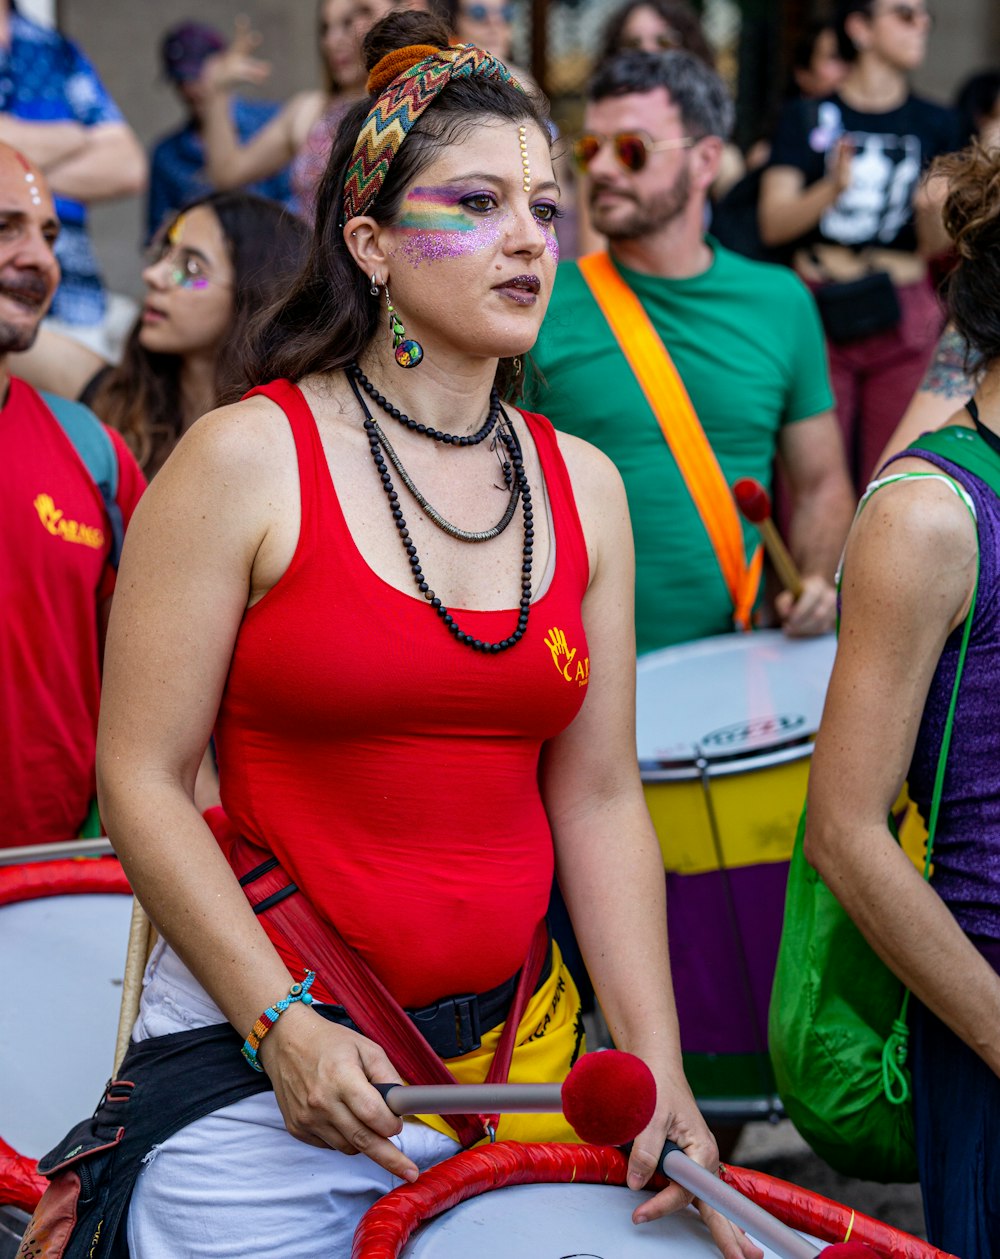 a woman in a red tank top is holding a drum